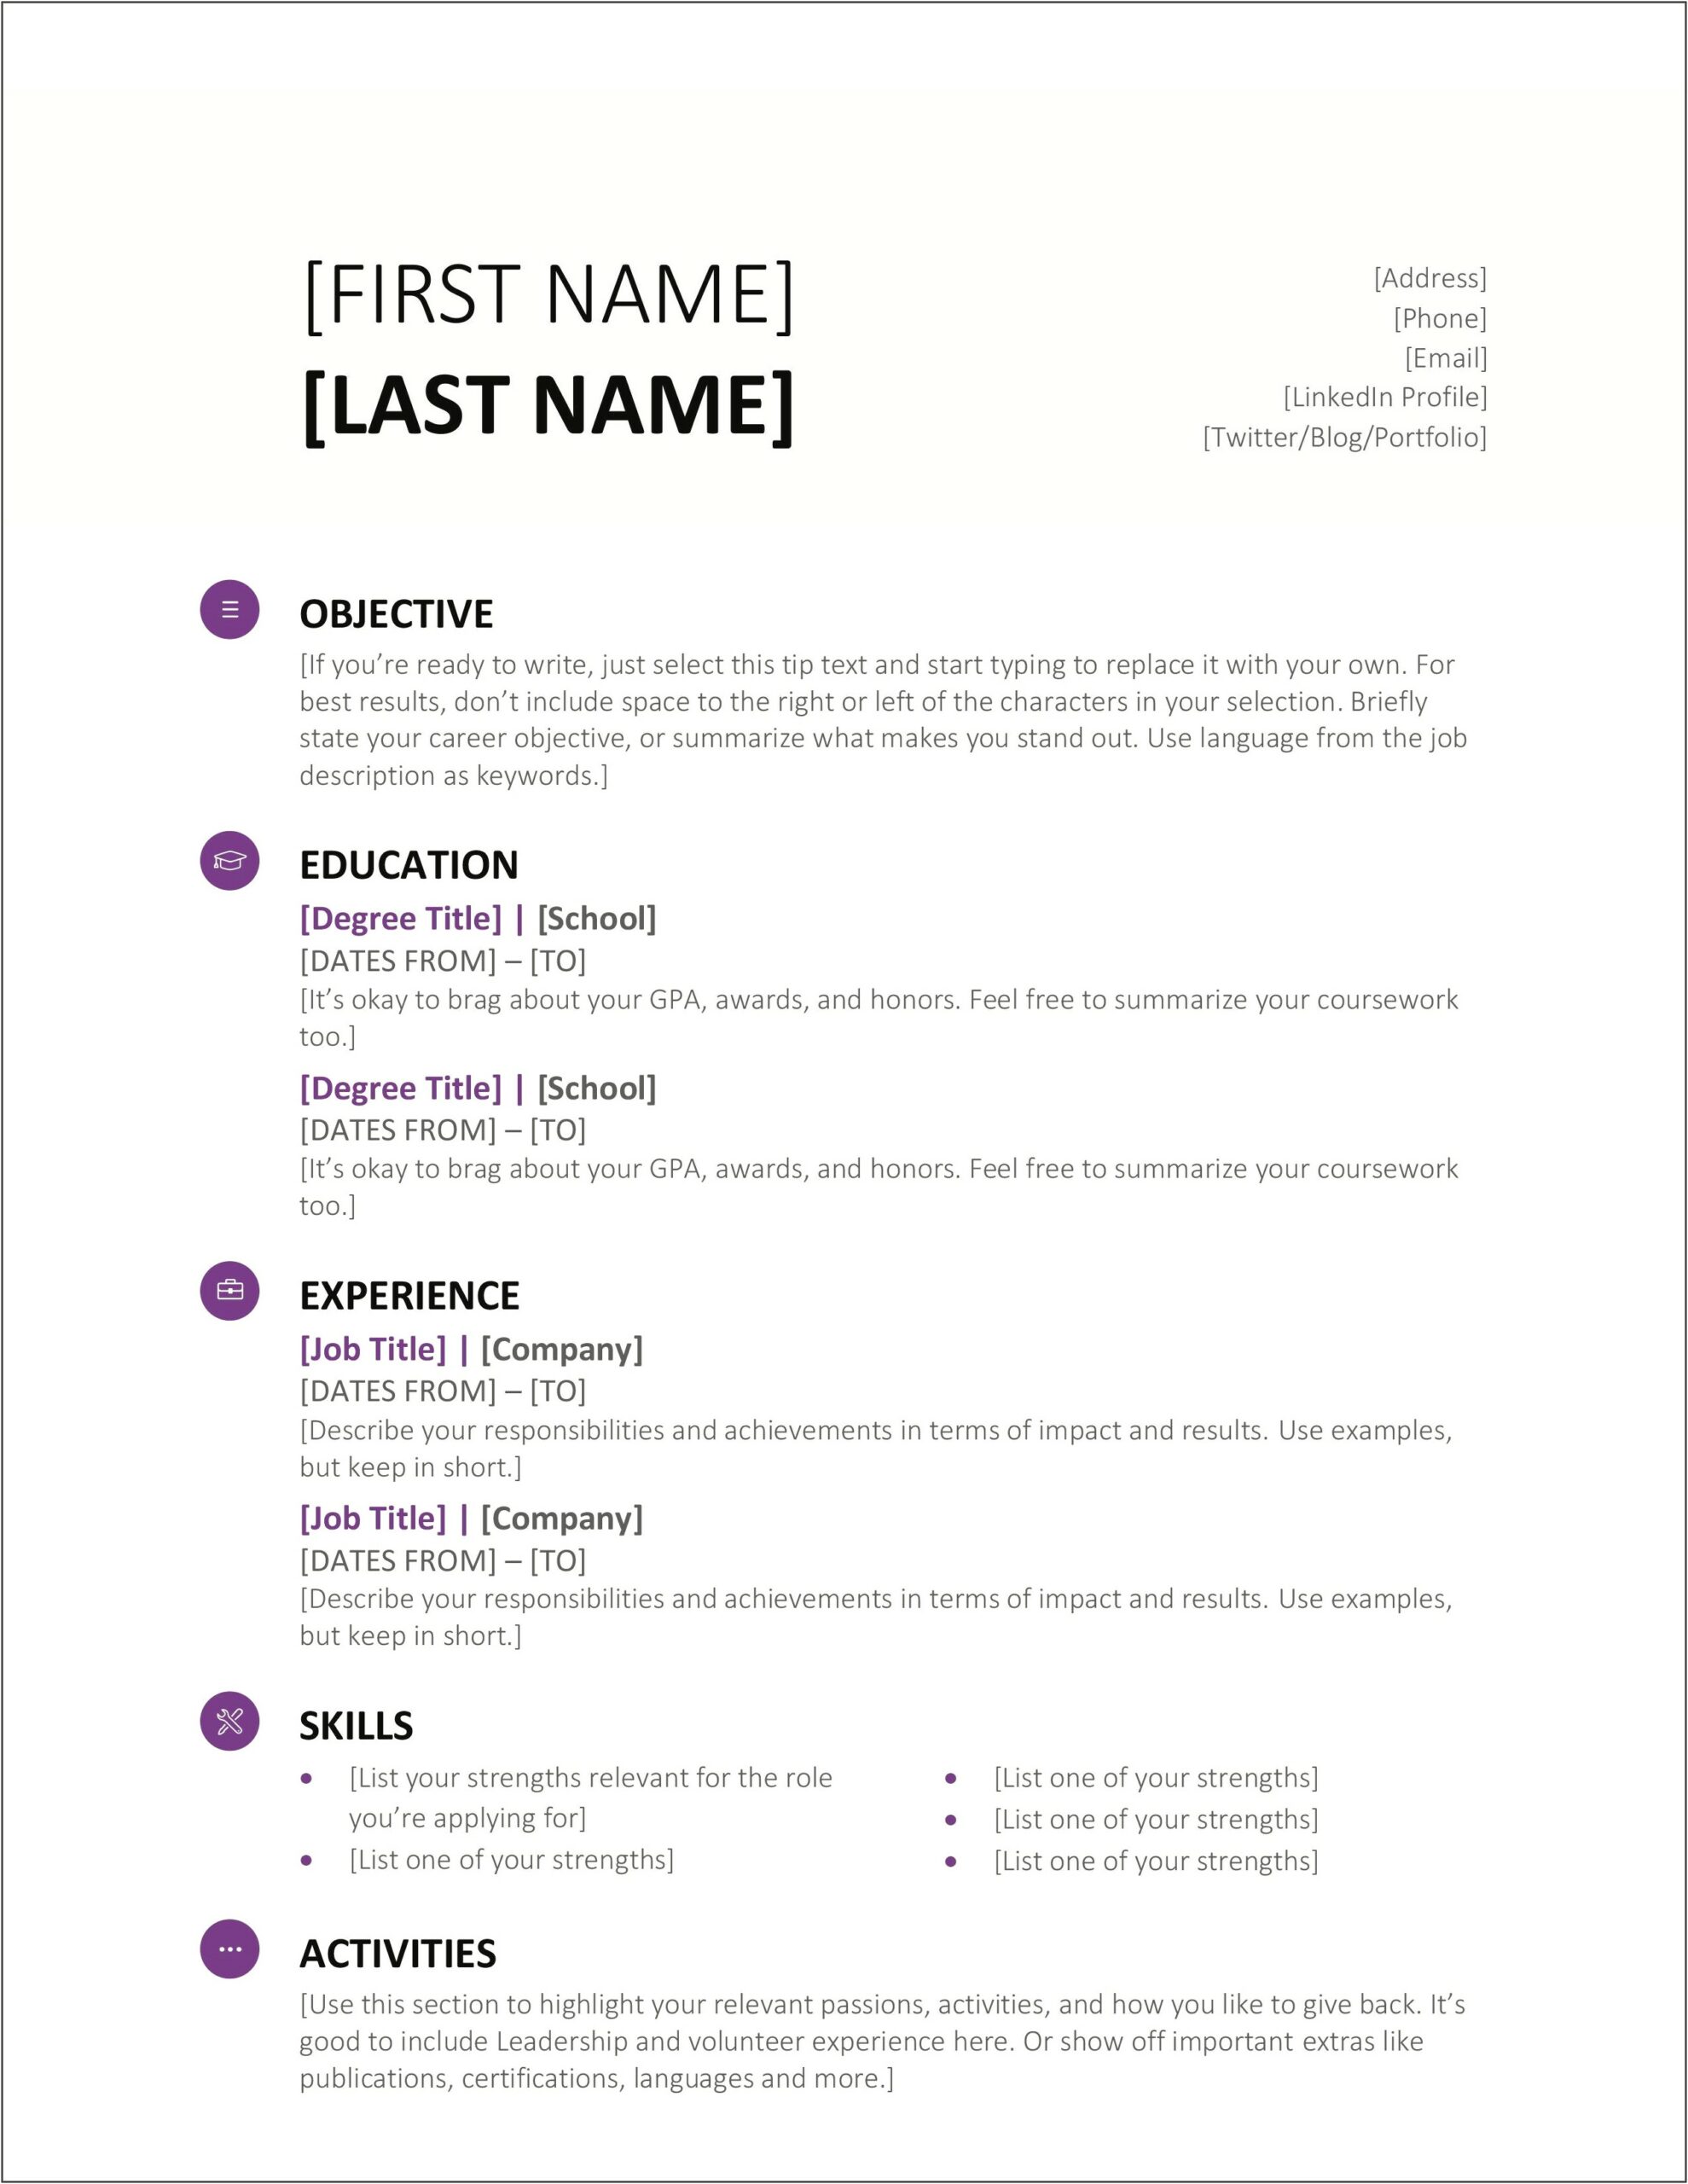 Latest Resume Format Download In Ms Word 2007